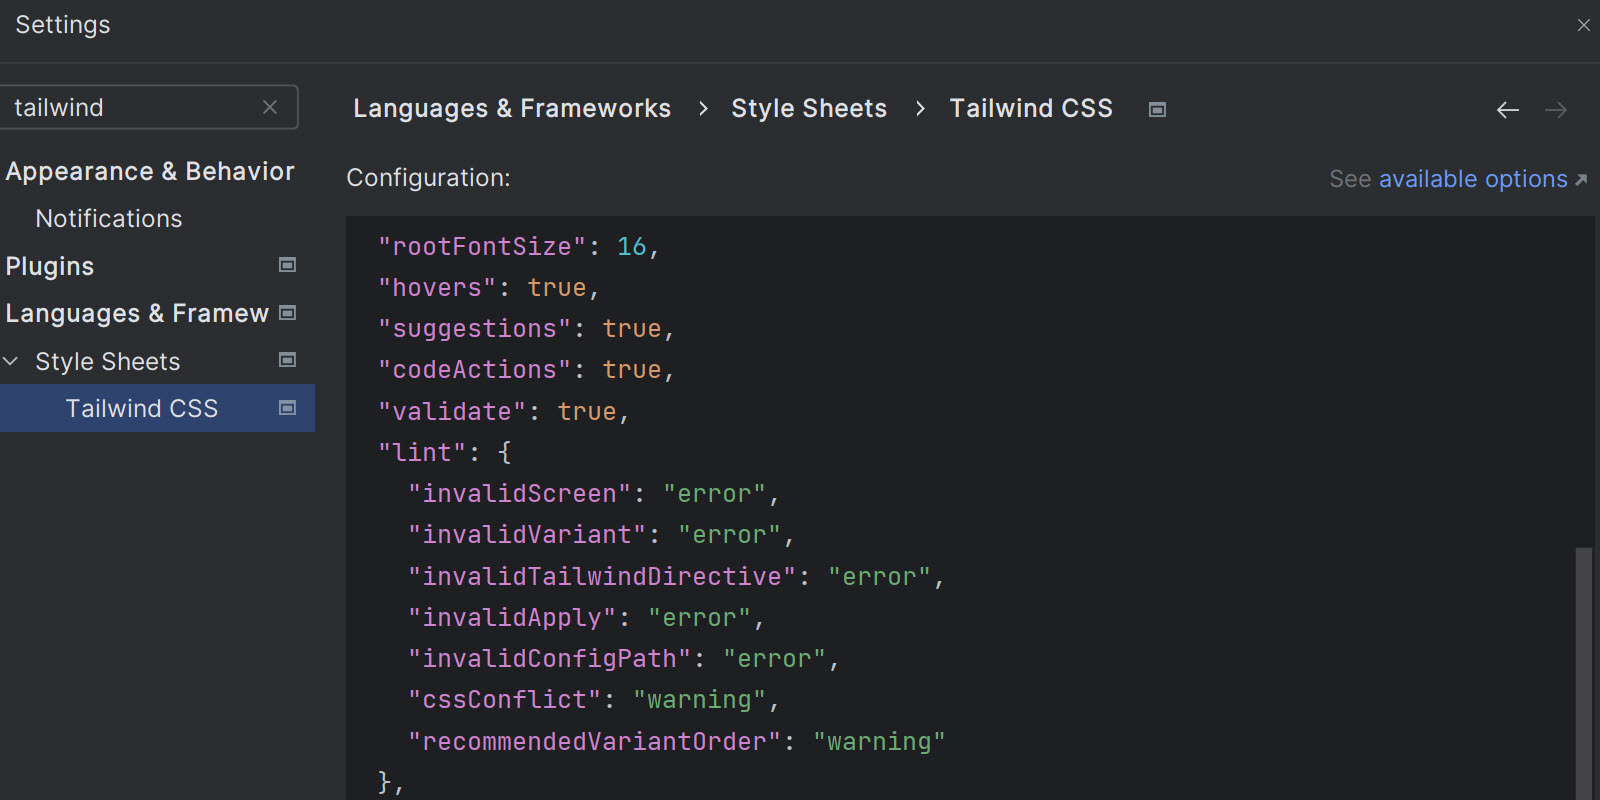 Tailwind CSS settings in the IDE